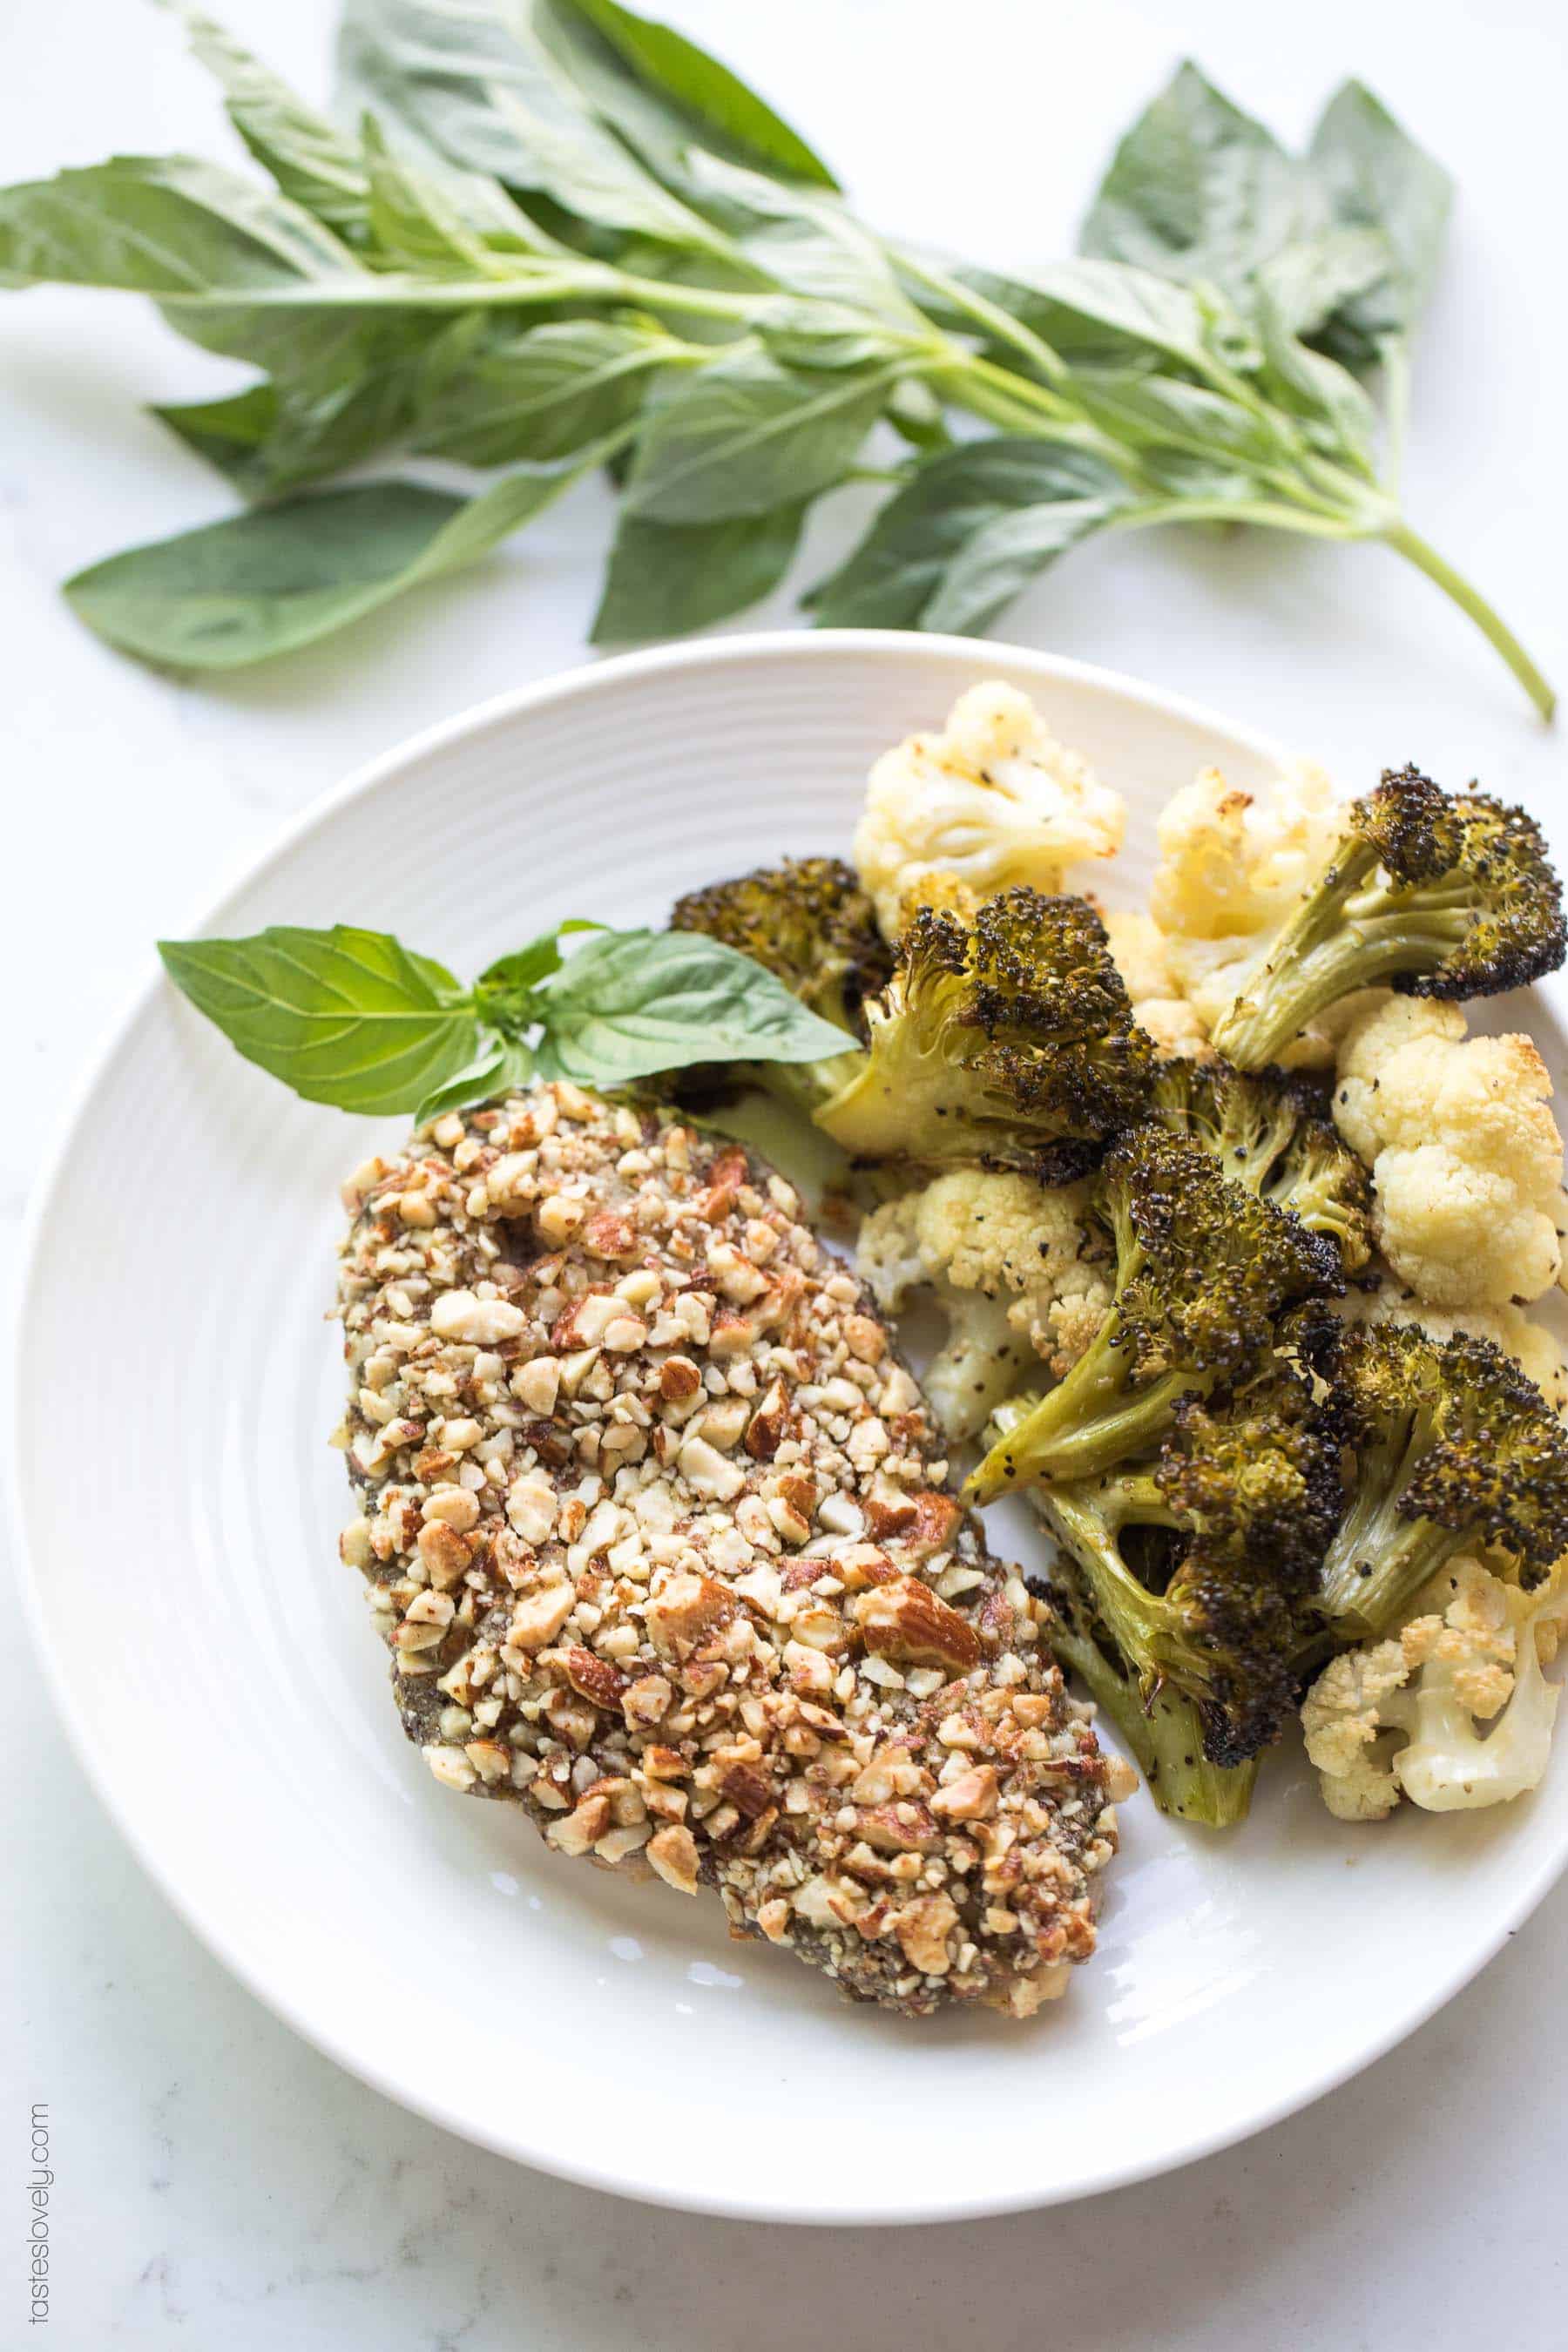 Paleo + Whole30 Almond Crusted Pesto Chicken - a quick and healthy 30 minute dinner recipe! #paleo #whole30 #glutenfree #grainfree #dairyfree #sugarfree #keto #cleaneating #realfood